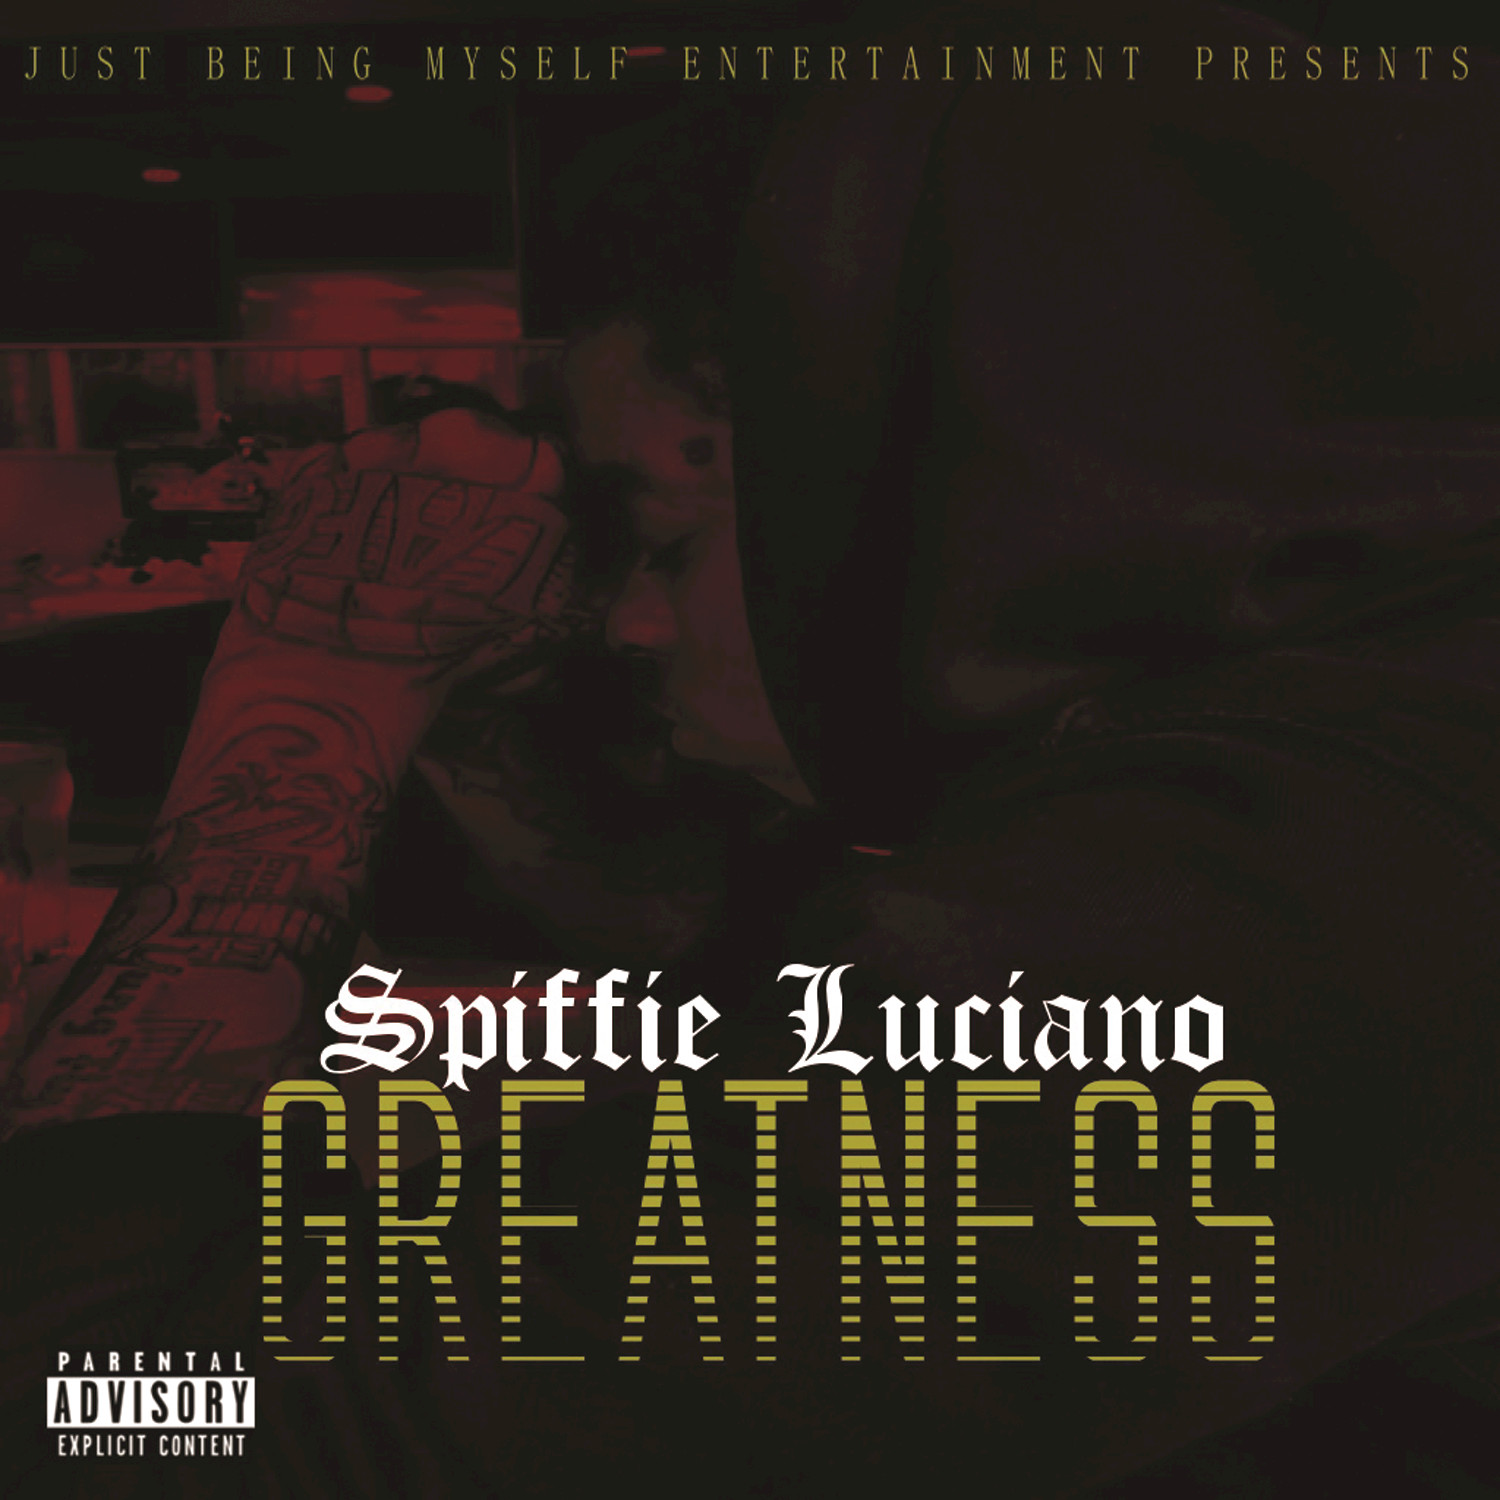 Just Being Myself Entertainment Presents Greatness